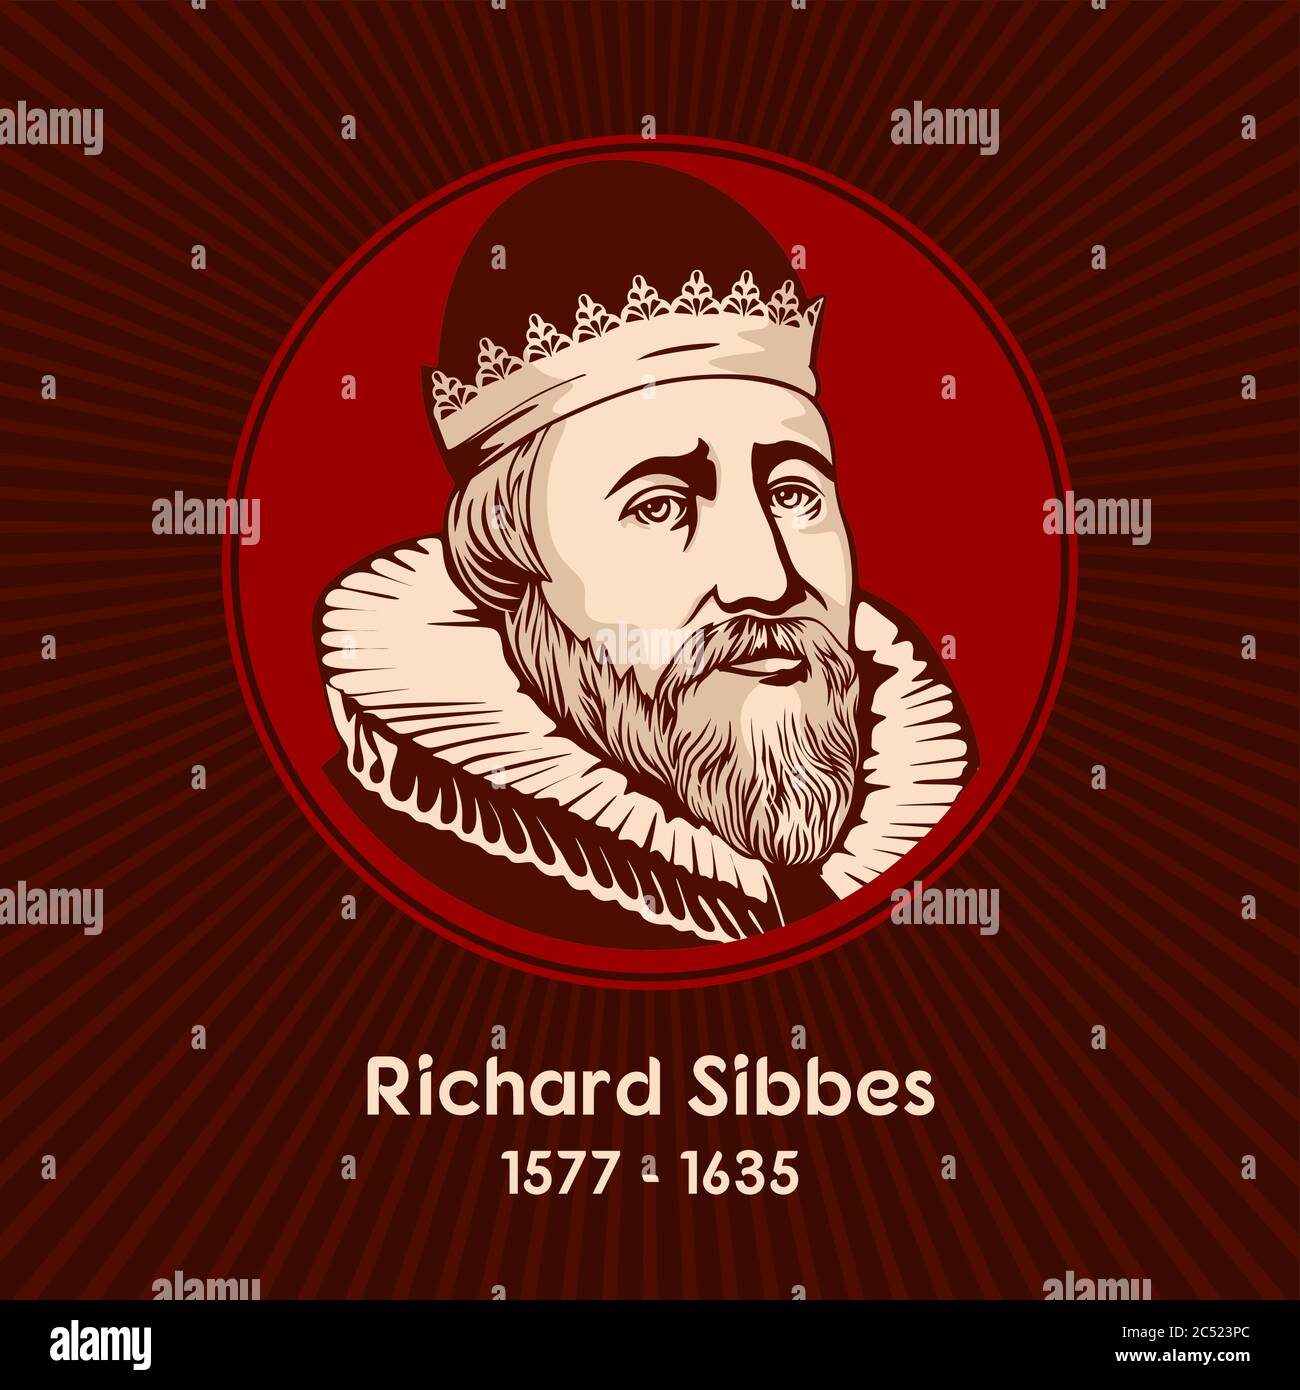 Richard Sibbes (1577 - 1635) was an Anglican theologian. He is known as a Biblical exegete, and as a representative, with William Perkins and John Pre Stock Vector